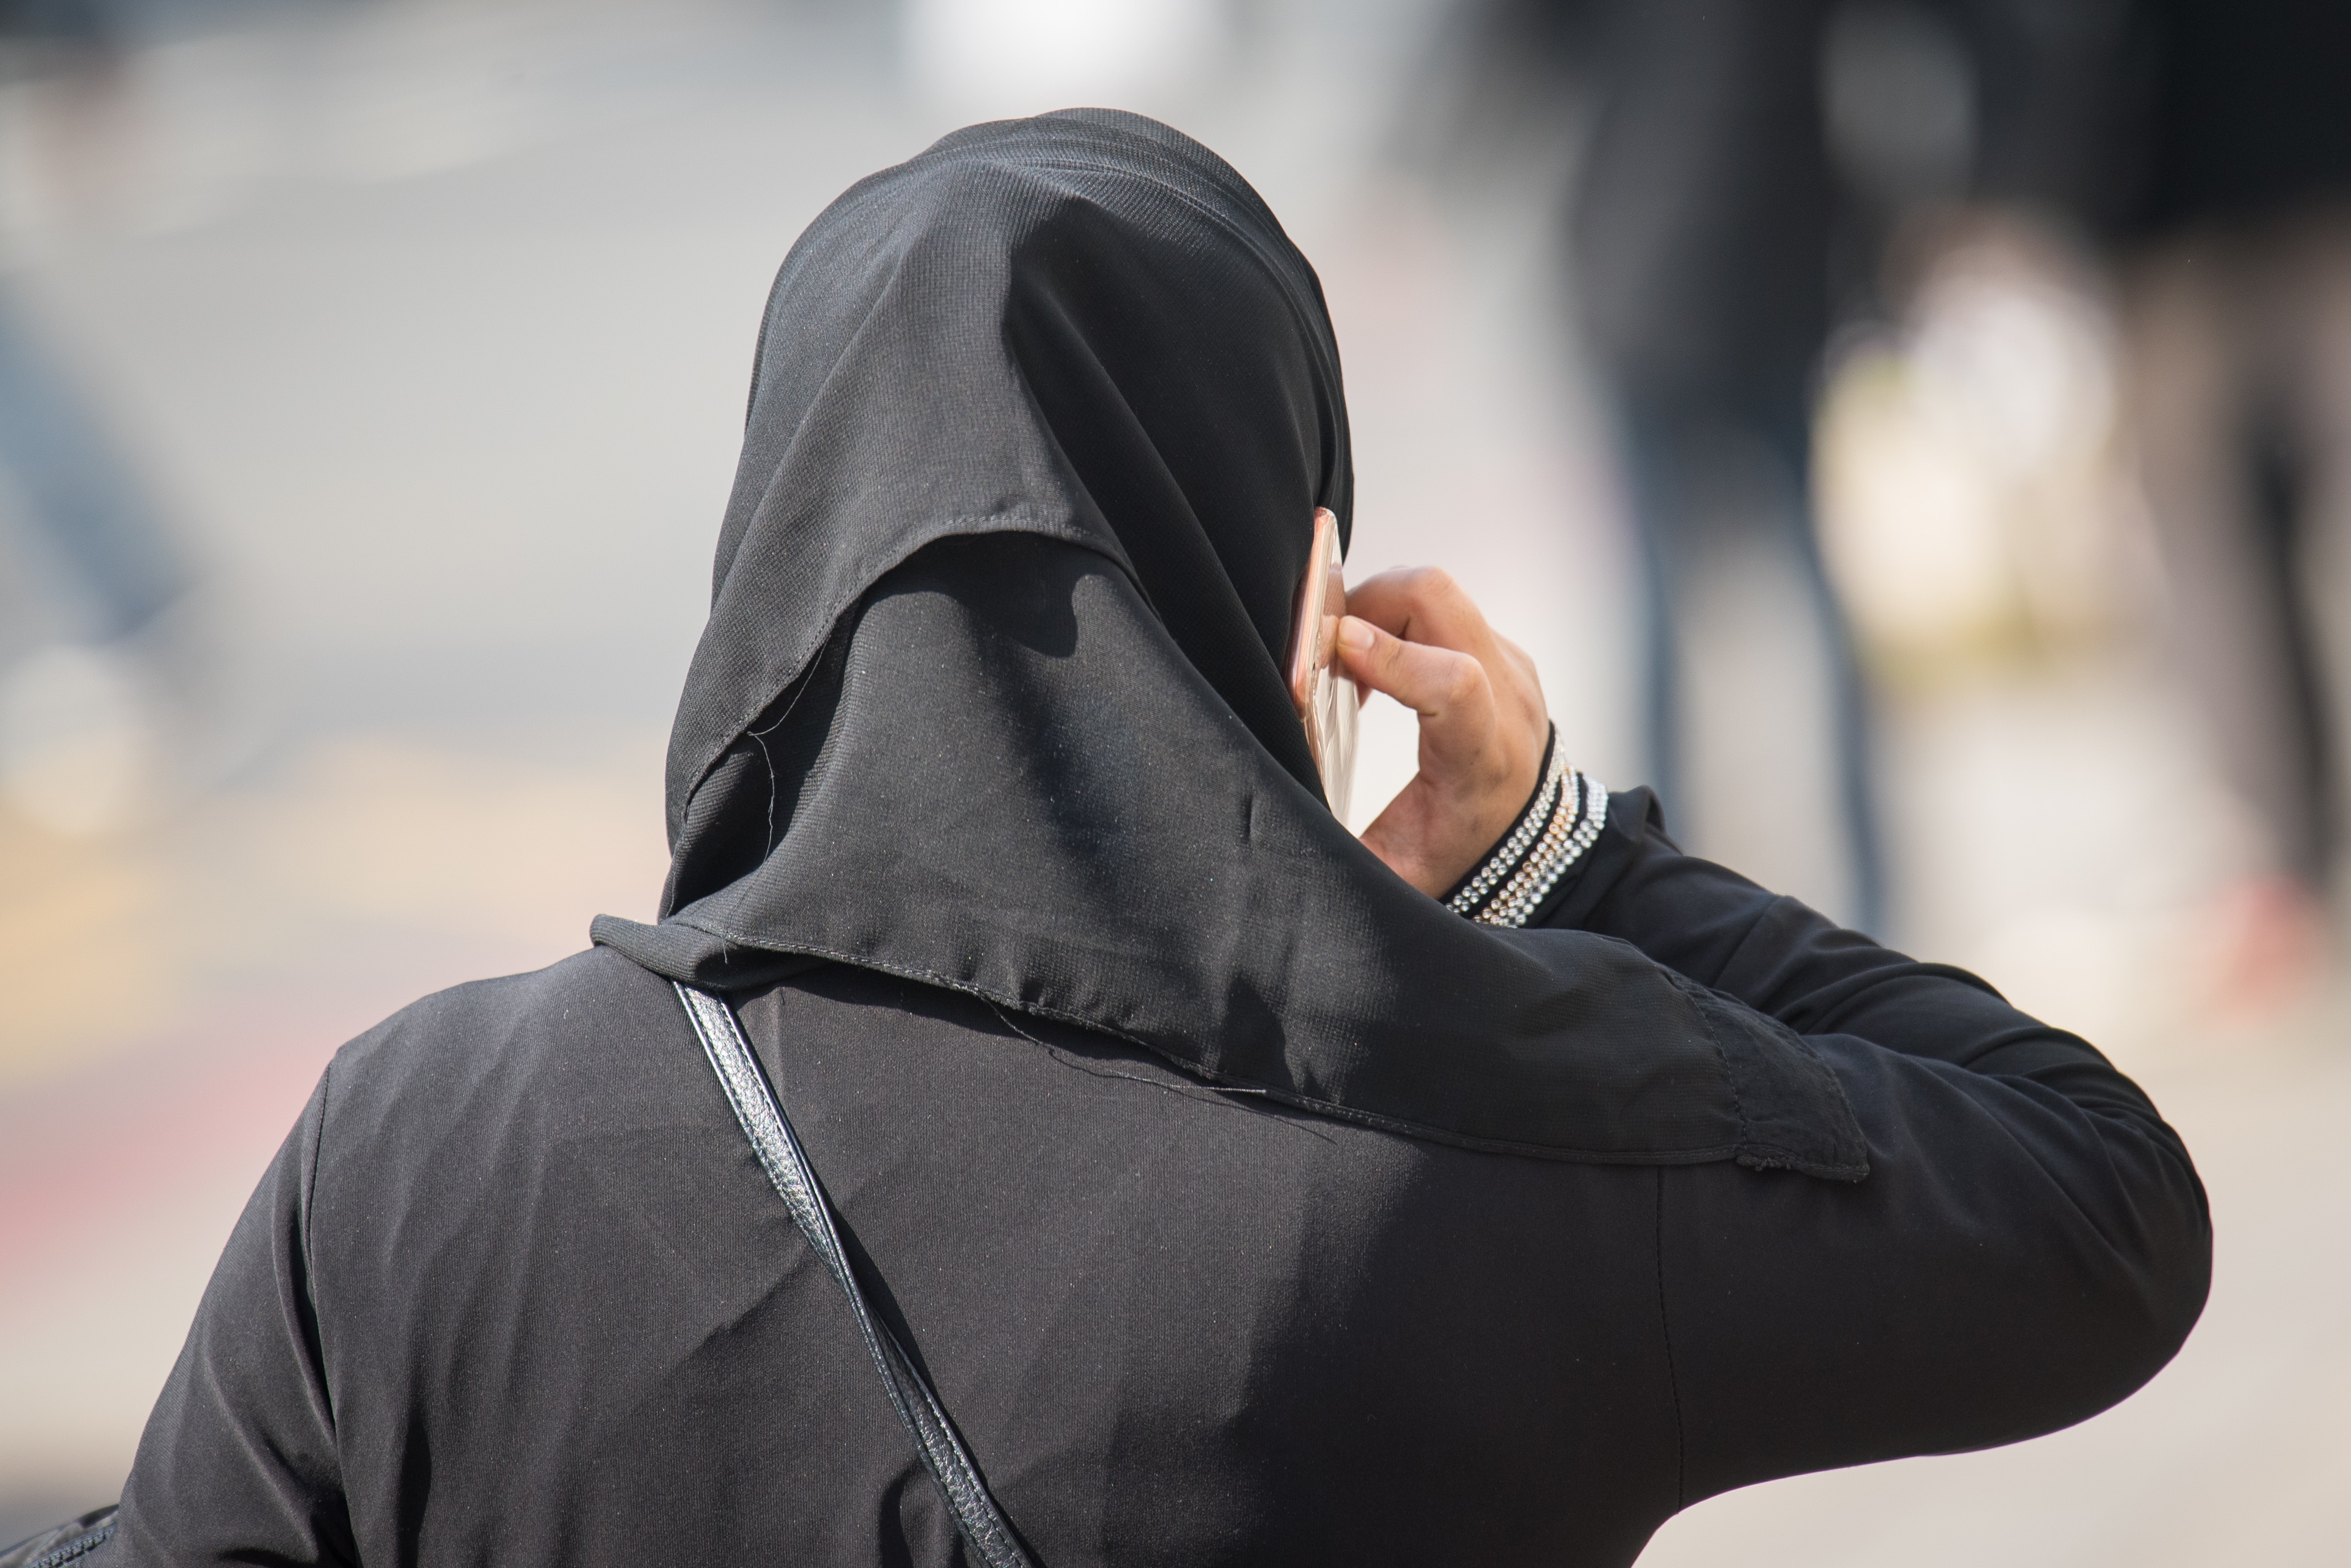 A new report found a disturbing trend of women wearing headscarves being attacked. 